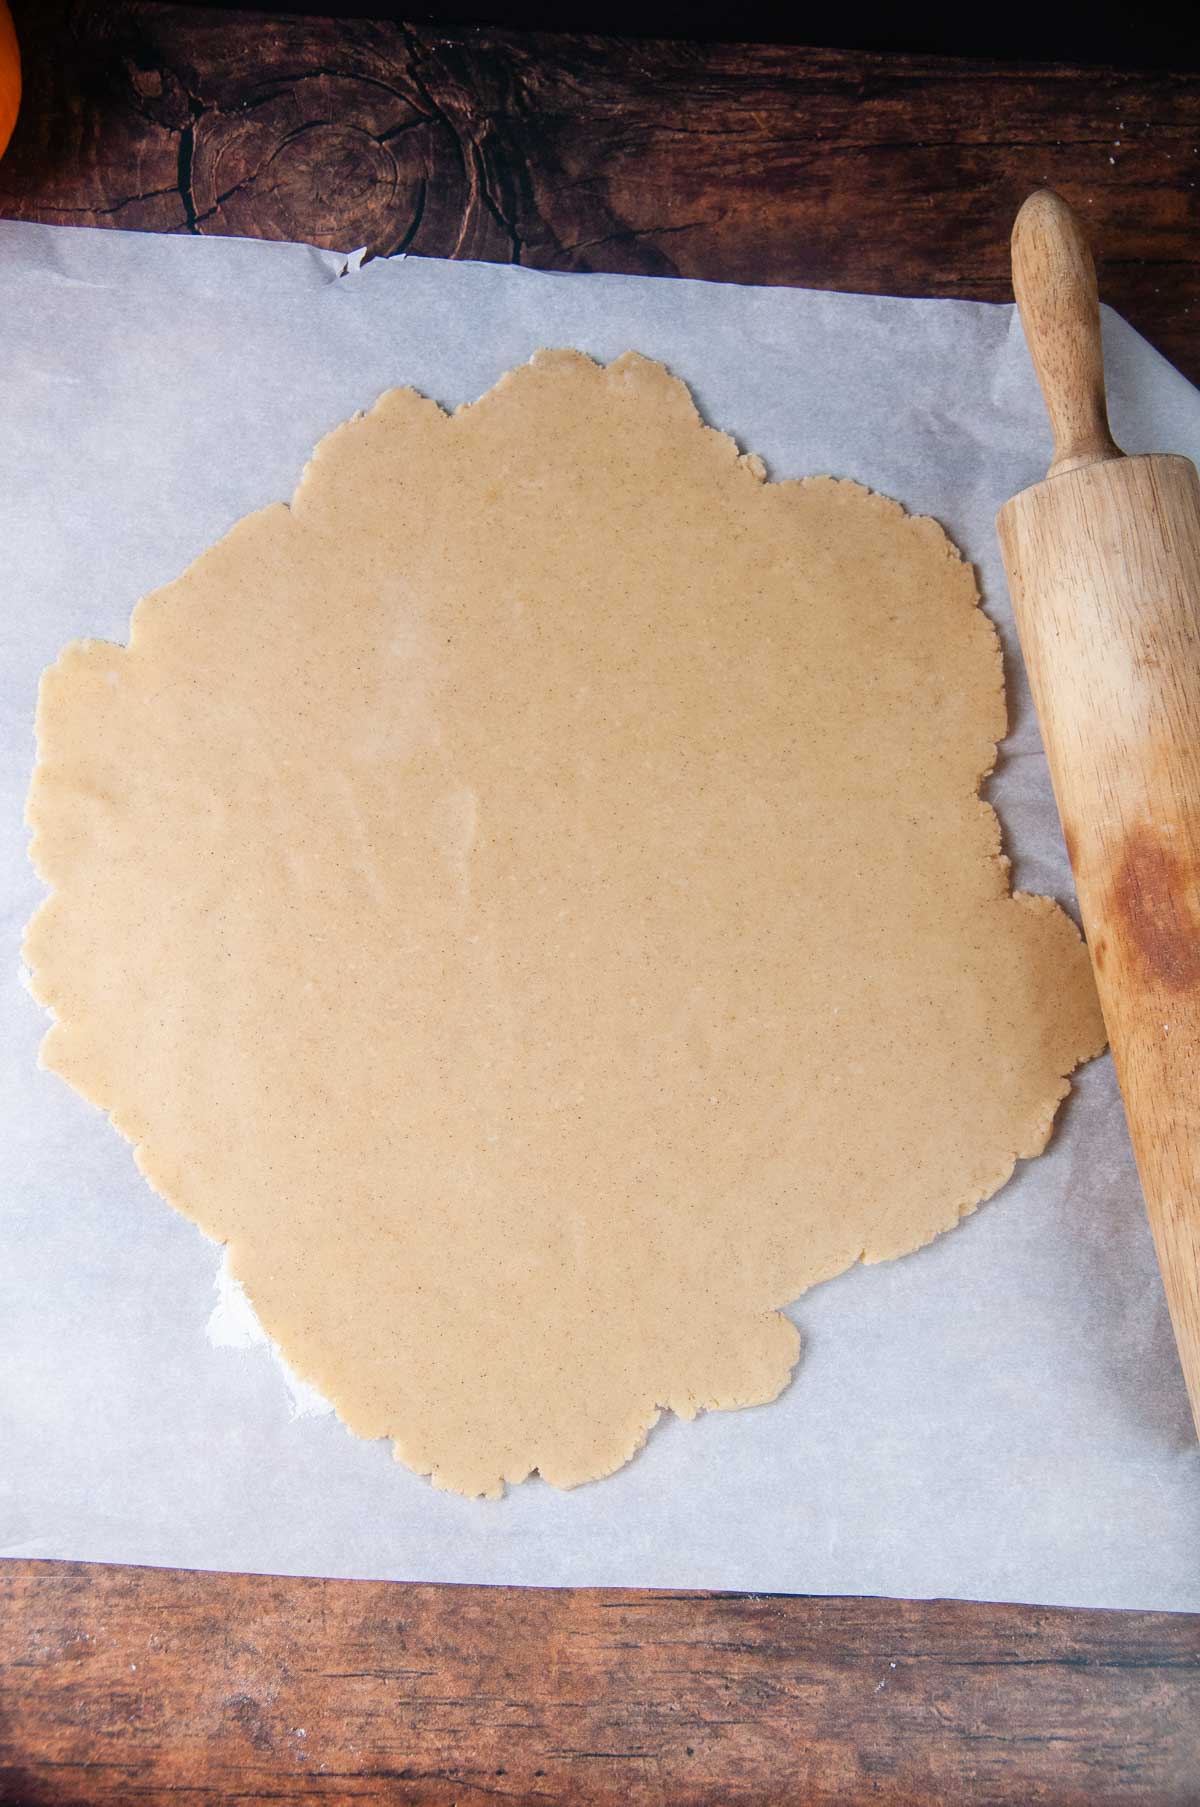 Roll out half of the pumpkin spice cookie dough on a sheet of parchment paper.